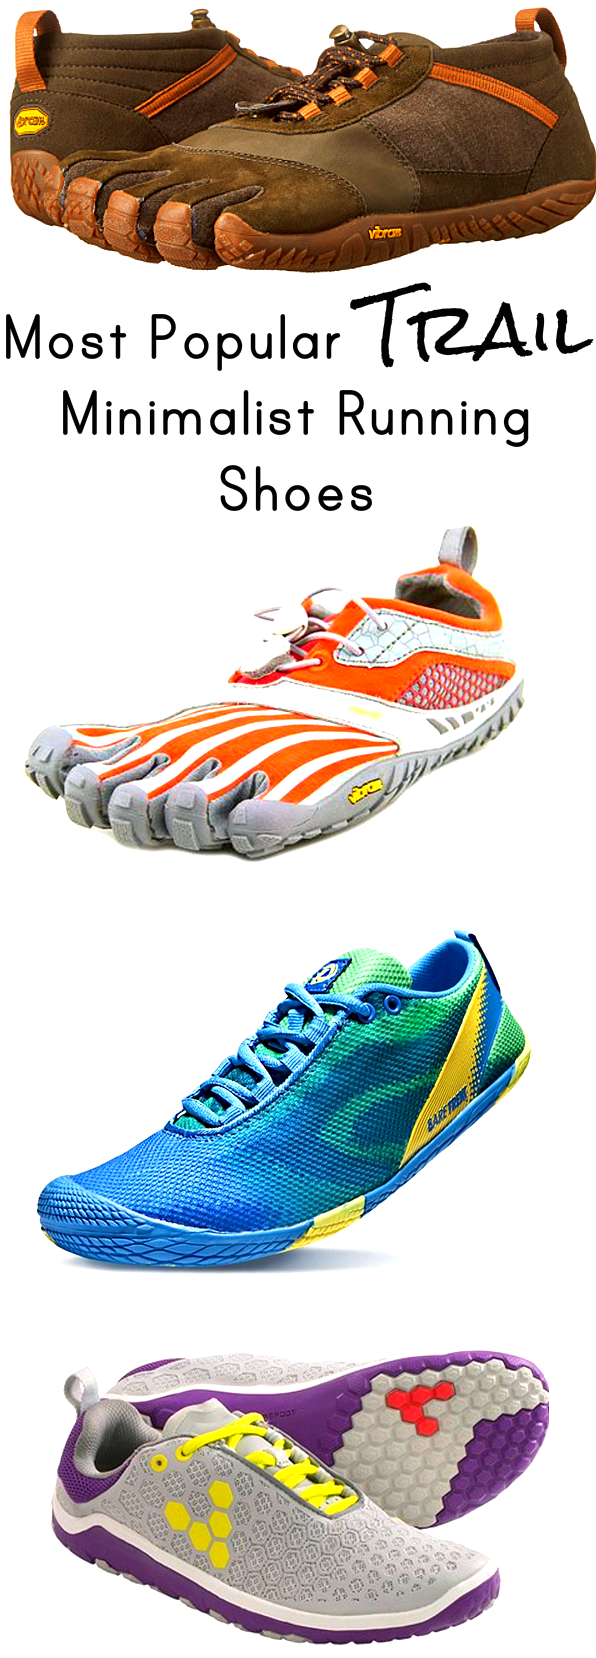 Trail Running Shoe Guide for Forefoot Runners